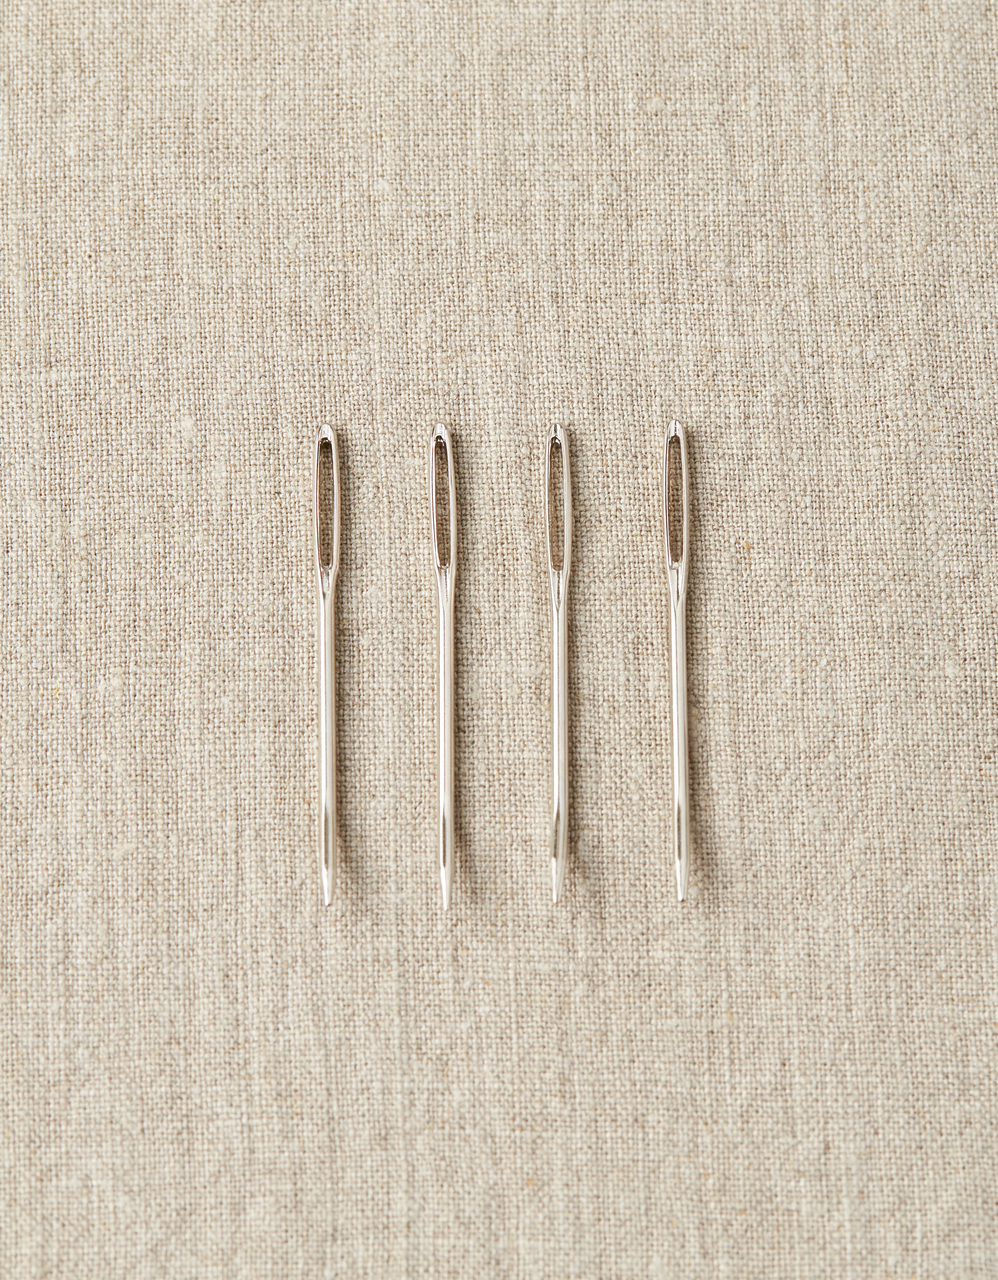 Cocoknits Bend Tip Tapestry Needles